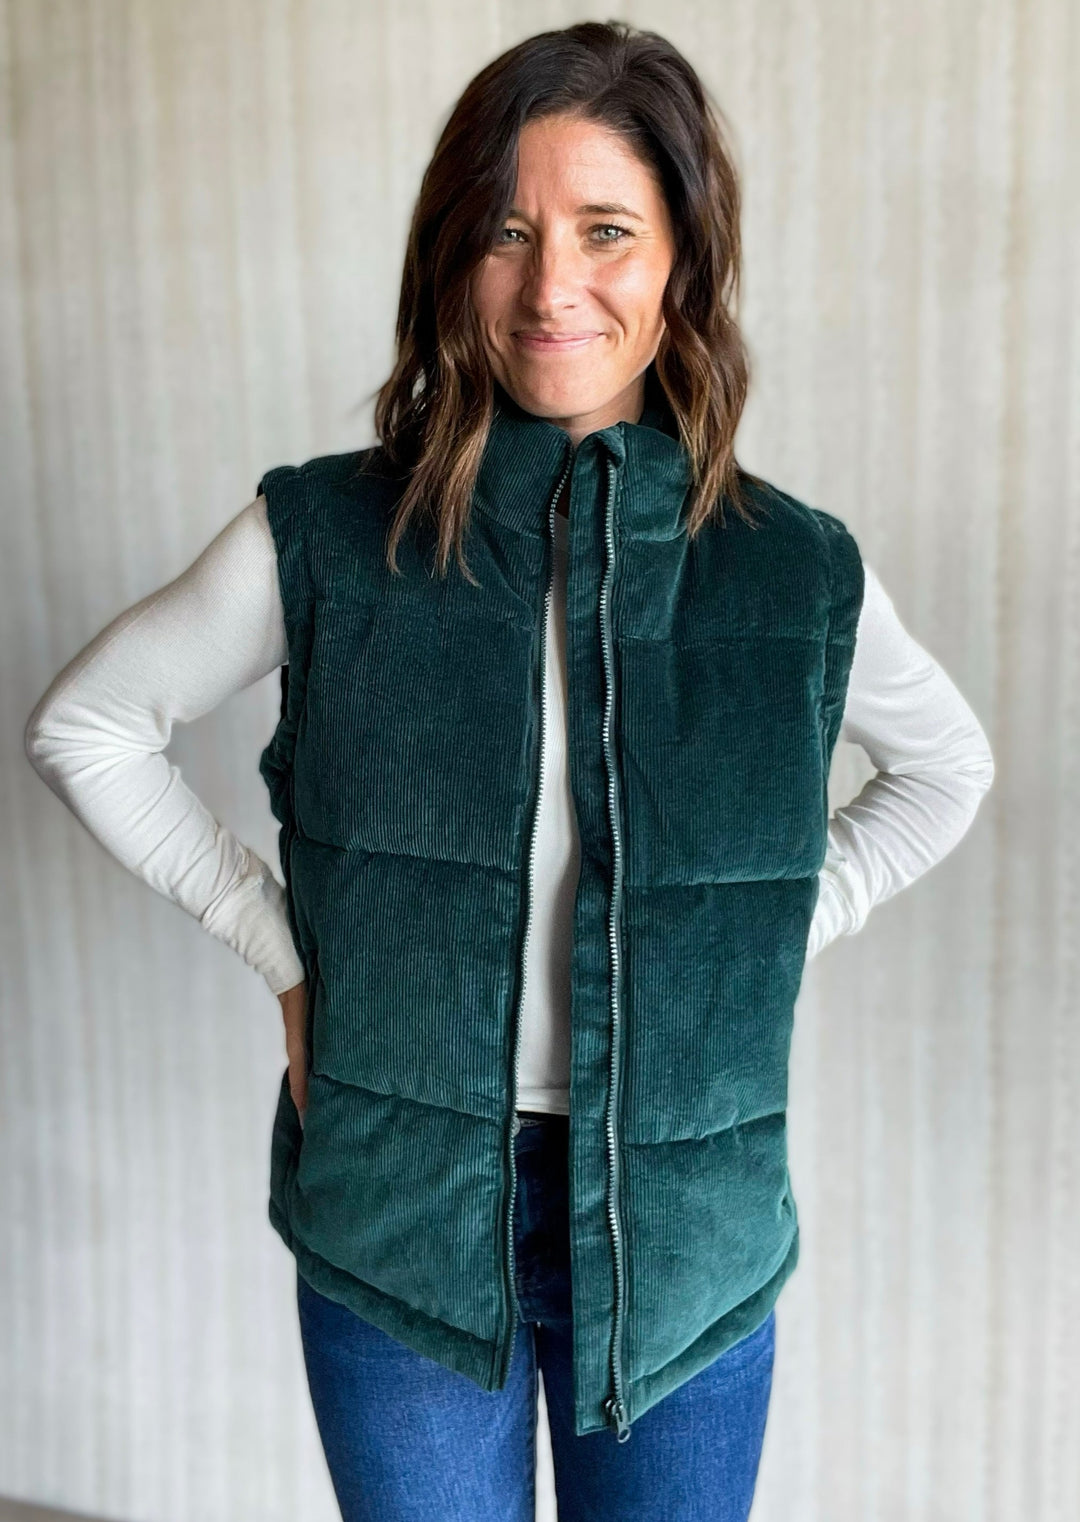 Evergreen Corduroy Vest sold at Embolden, a Champaign-Urbana Women's Clothing Boutique (Thread & Supply Brand)